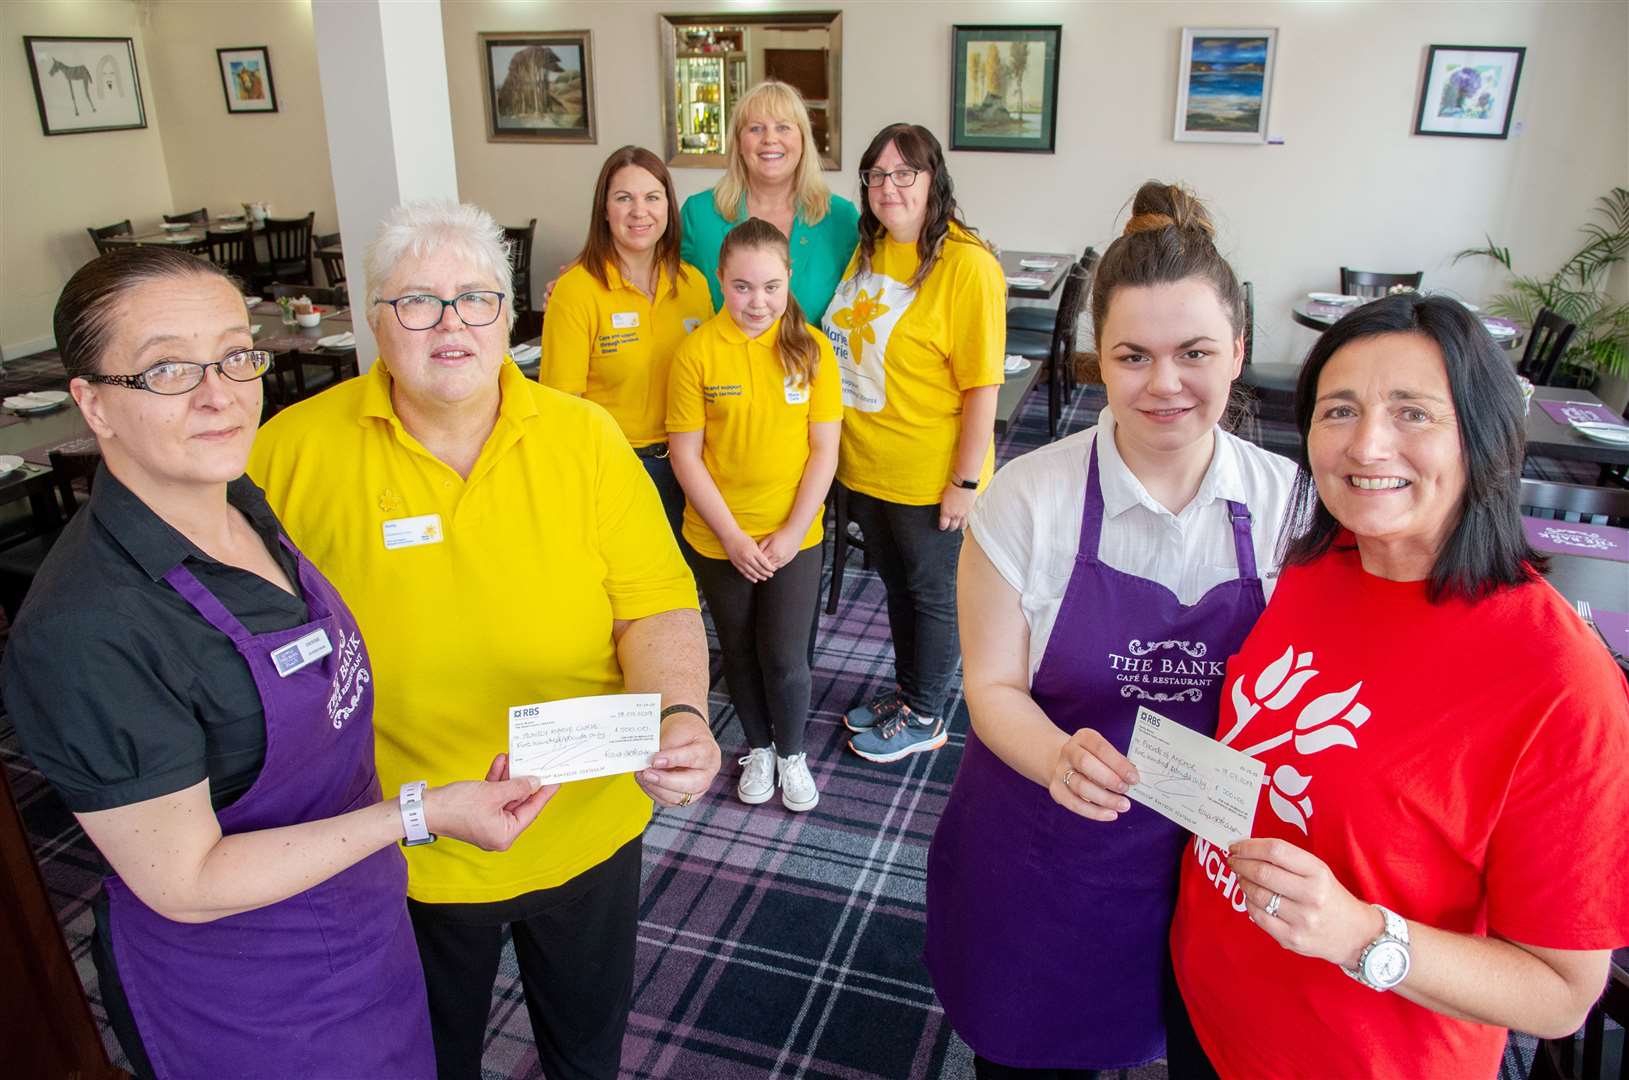 The Bank Cafe hands over a pair of cheques for £500 to Marie Curie and The Friends of Anchor which they raised from various raffles and by donating a share of their tips. Left to Right: Denise Robertson (supervisor at The Bank), Alison Nicoll (chairperson of the Huntly Marie Curie Group), Debbie Morrison, Katie Morrison, Fiona Pearson (Owner at The Bank), Kelly Coutts, Bethany Skinner (waitress at The Bank), Donna Miller (volunteer at the Friends of ANCHOR). Picture: Daniel Forsyth. Image No.044472.